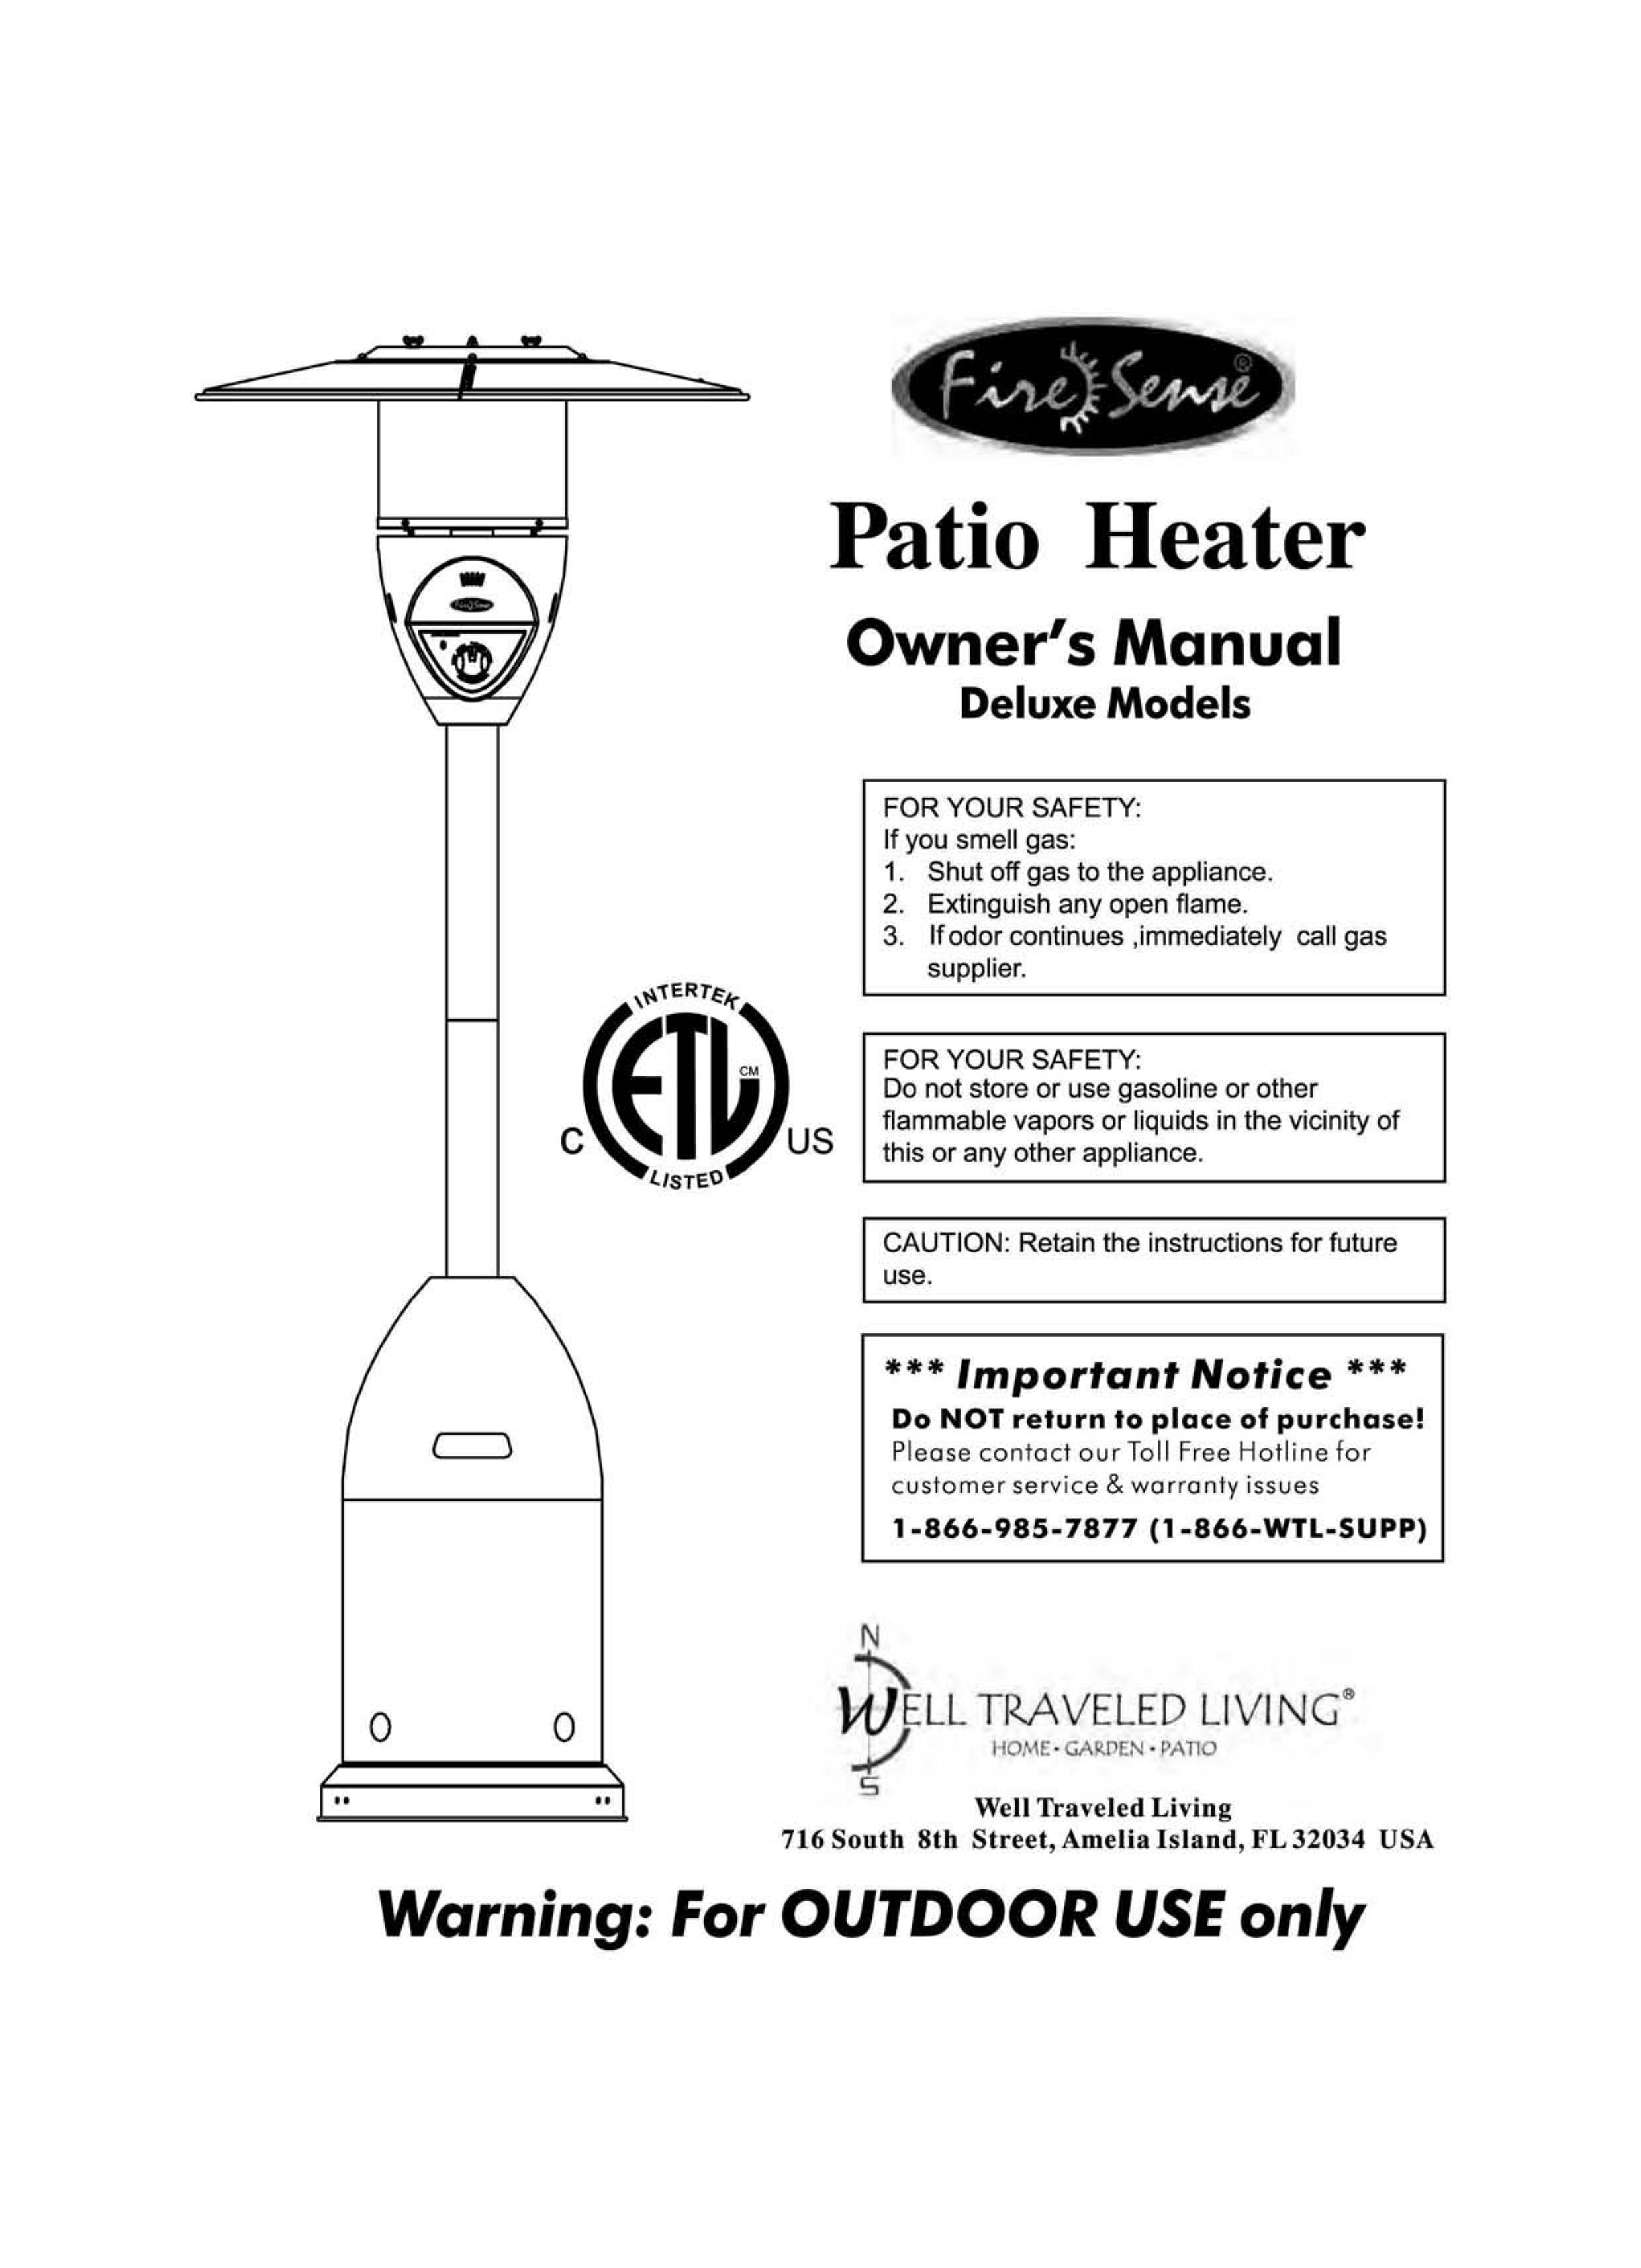 Well Traveled Living 11201 Patio Heater User Manual